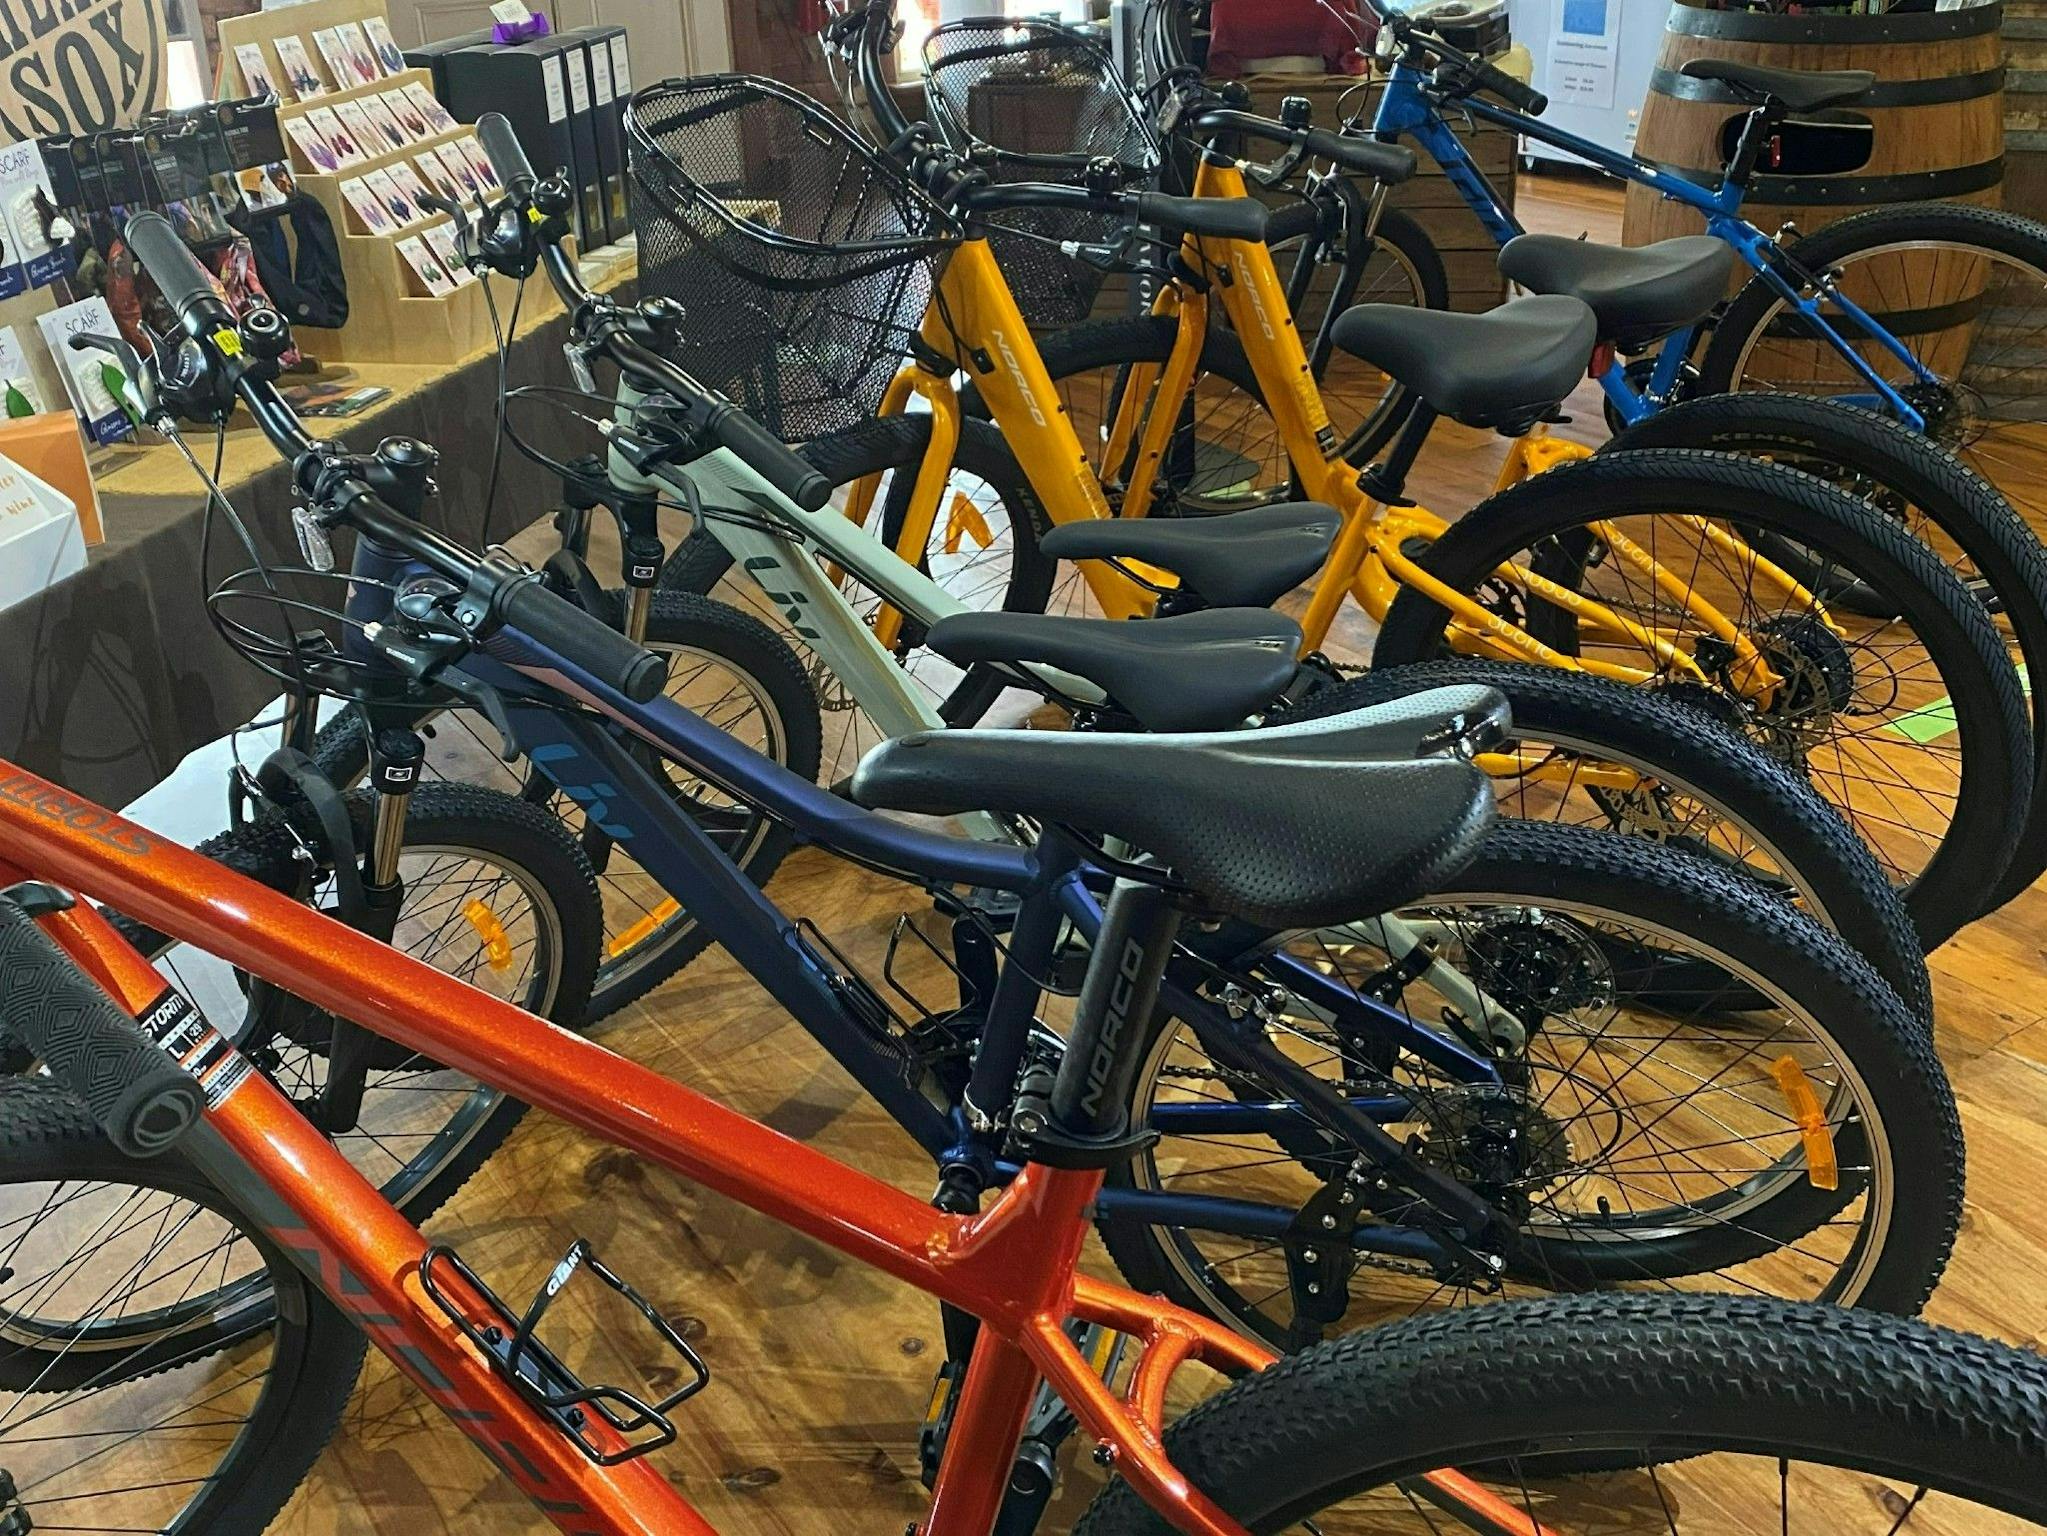 A large range of bikes for hire in different sizes